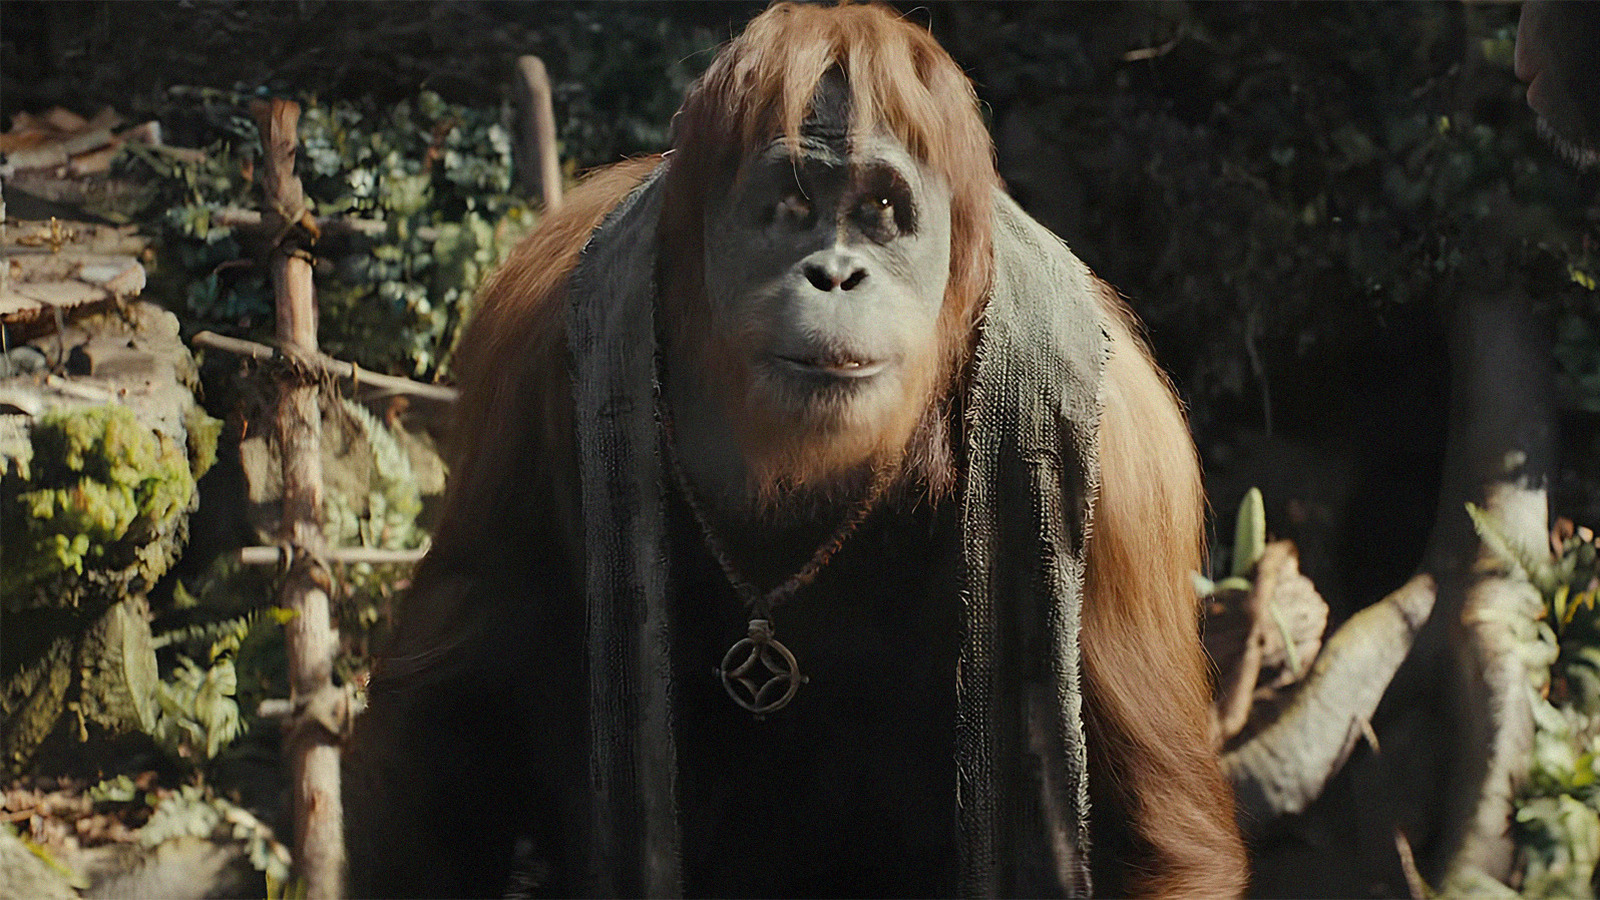 The Kingdom Of The Of The Apes Trailer Is That Doctor Zaius?